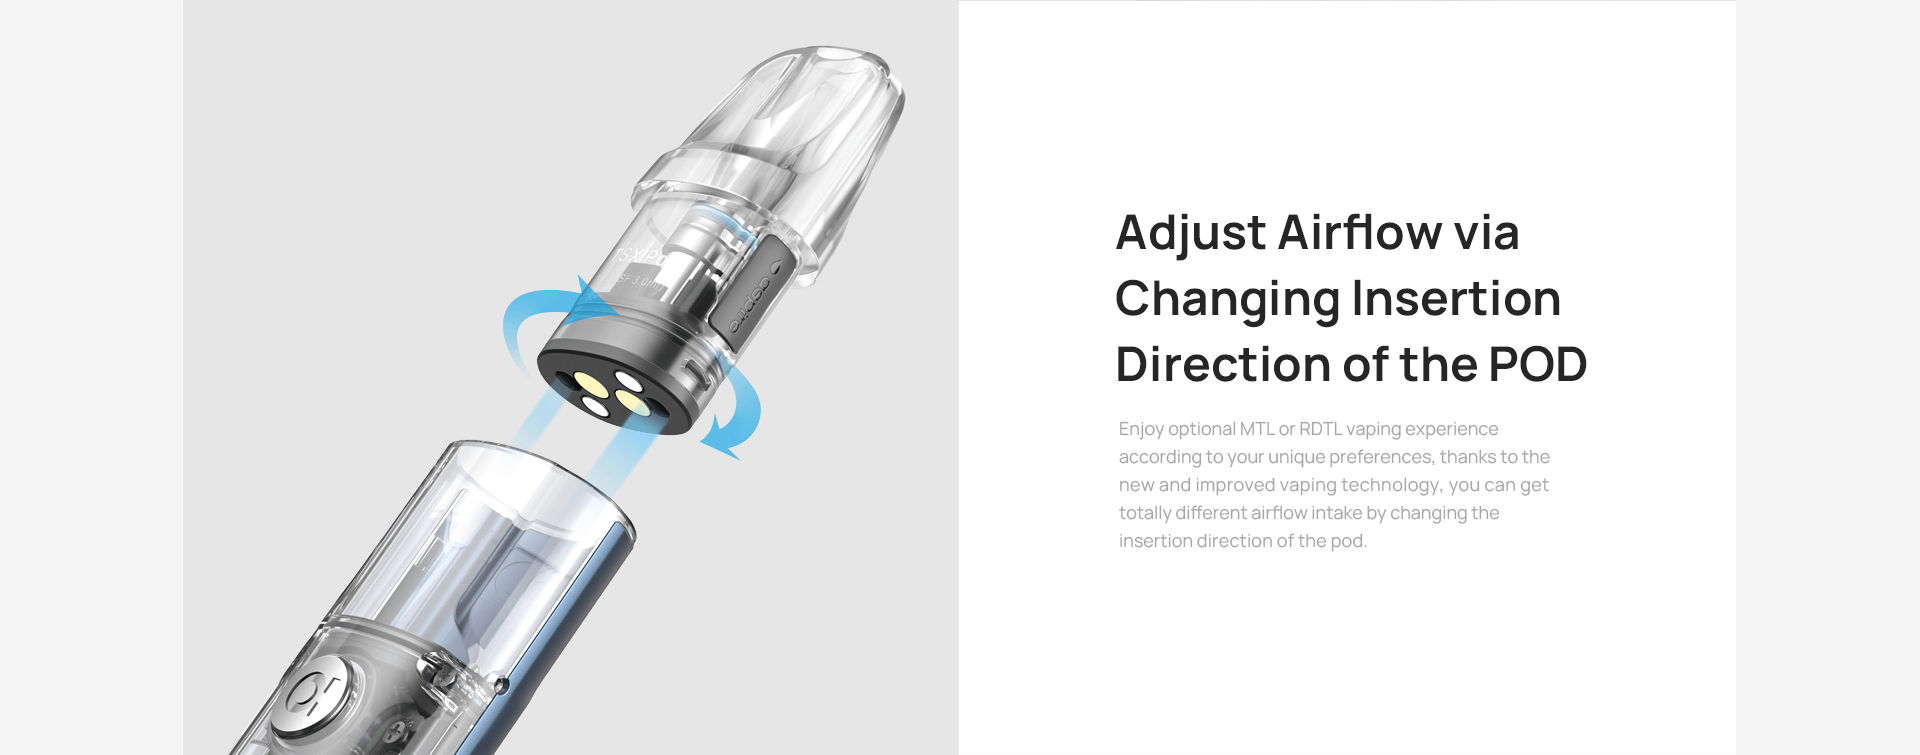 Aspire Cyber S | 'adjust airflow via changing insertion direction of the POD'